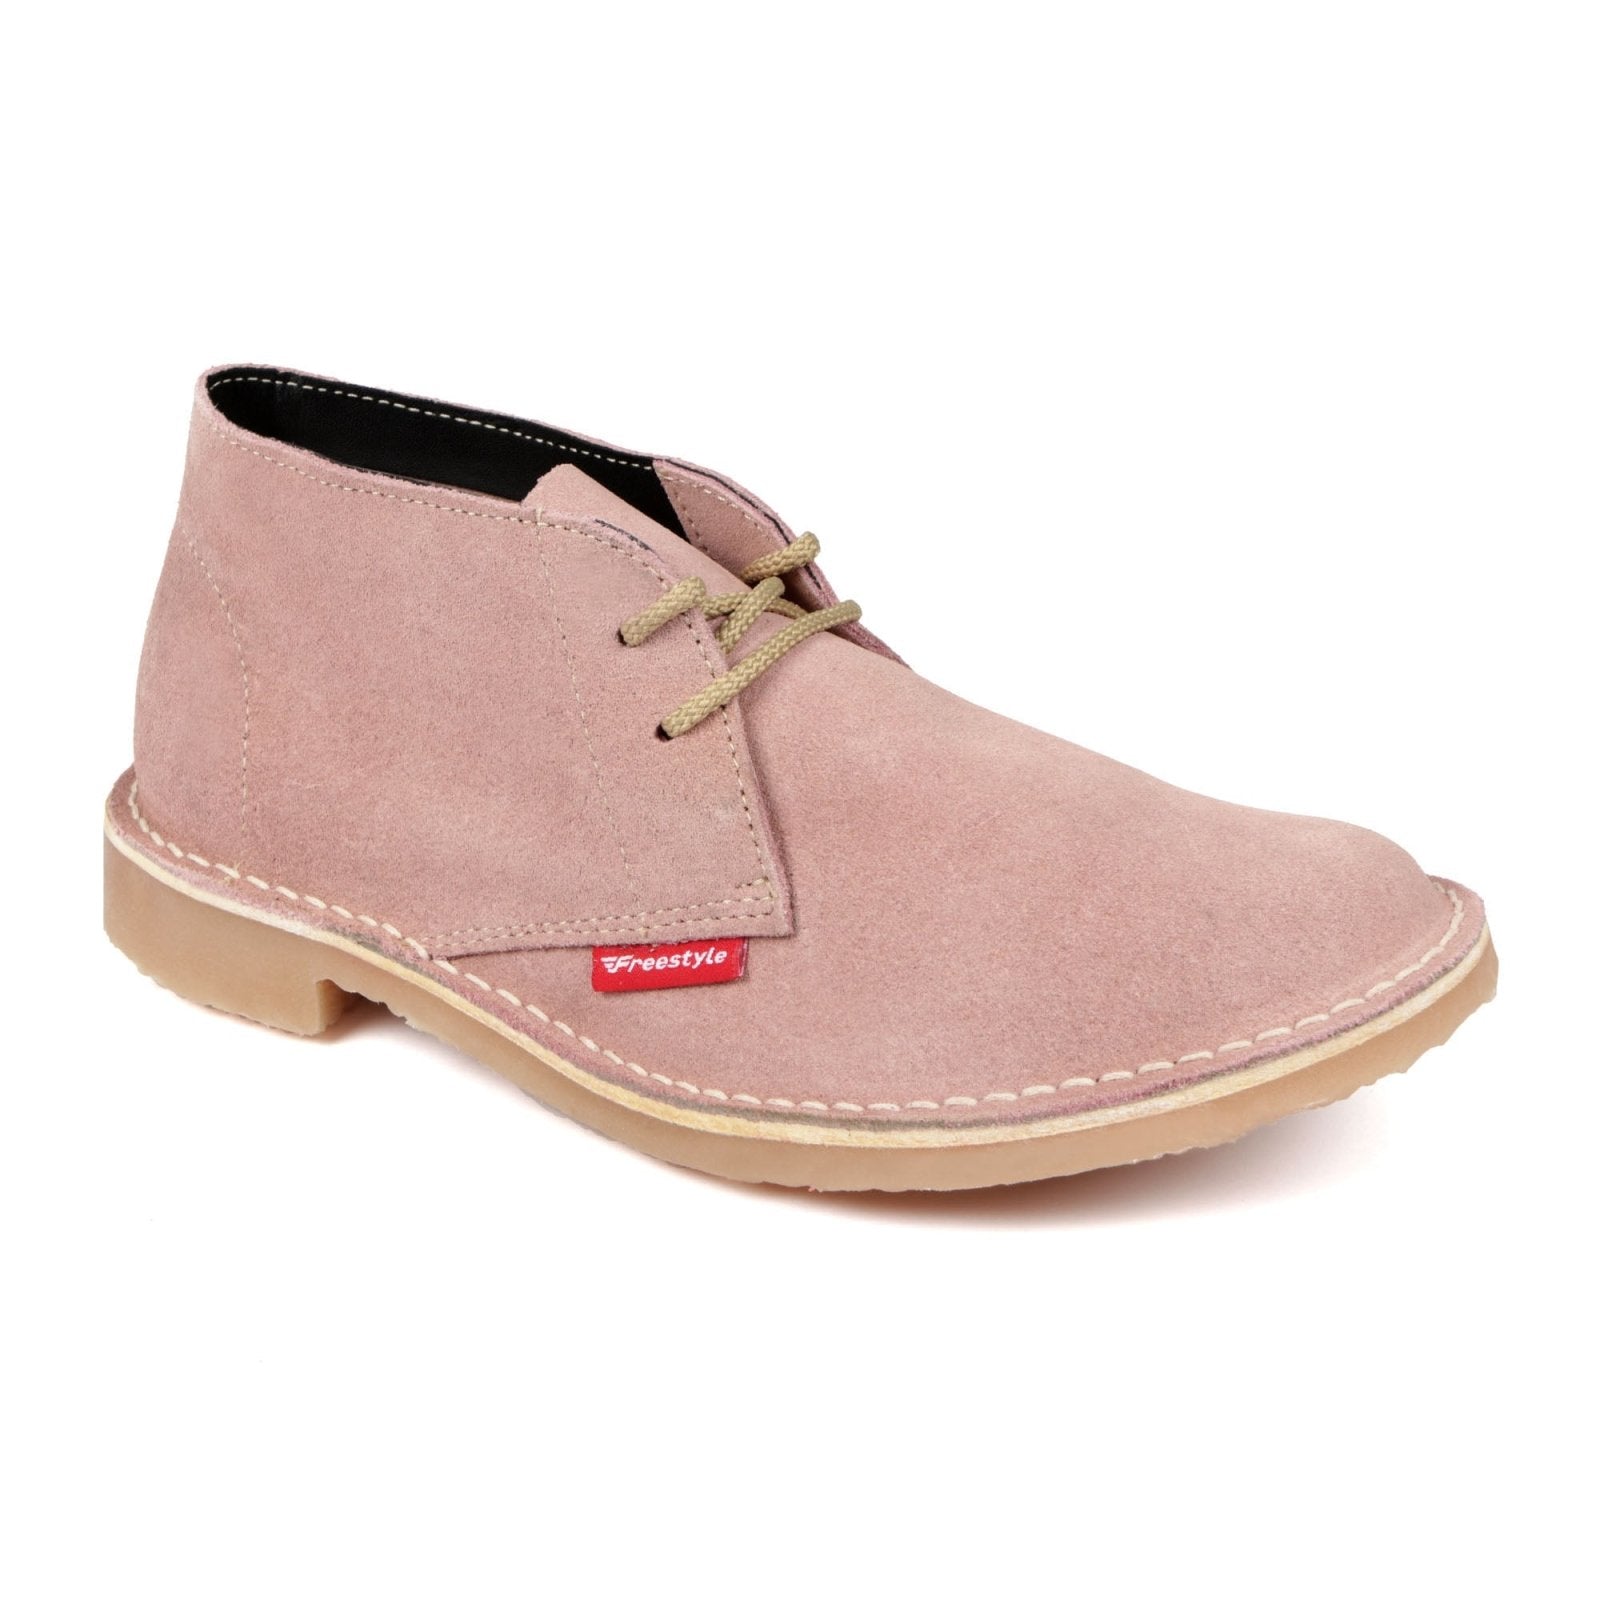 Hunter Vellie Unisex Premium Suede - Baby Pink - Freestyle SA Proudly local vellies leather boots veldskoens vellies leather shoes suede veldskoens